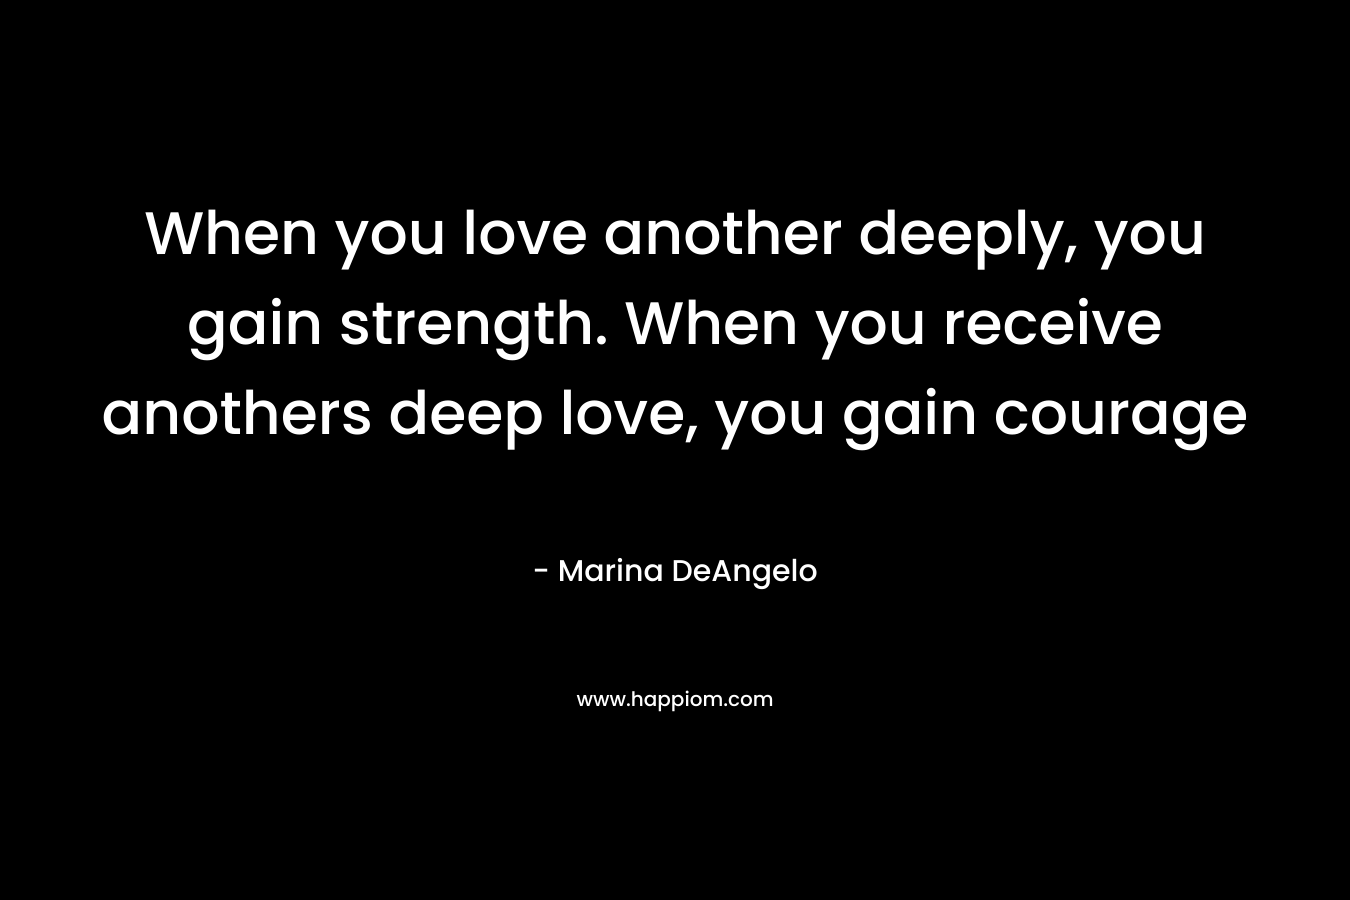 When you love another deeply, you gain strength. When you receive anothers deep love, you gain courage